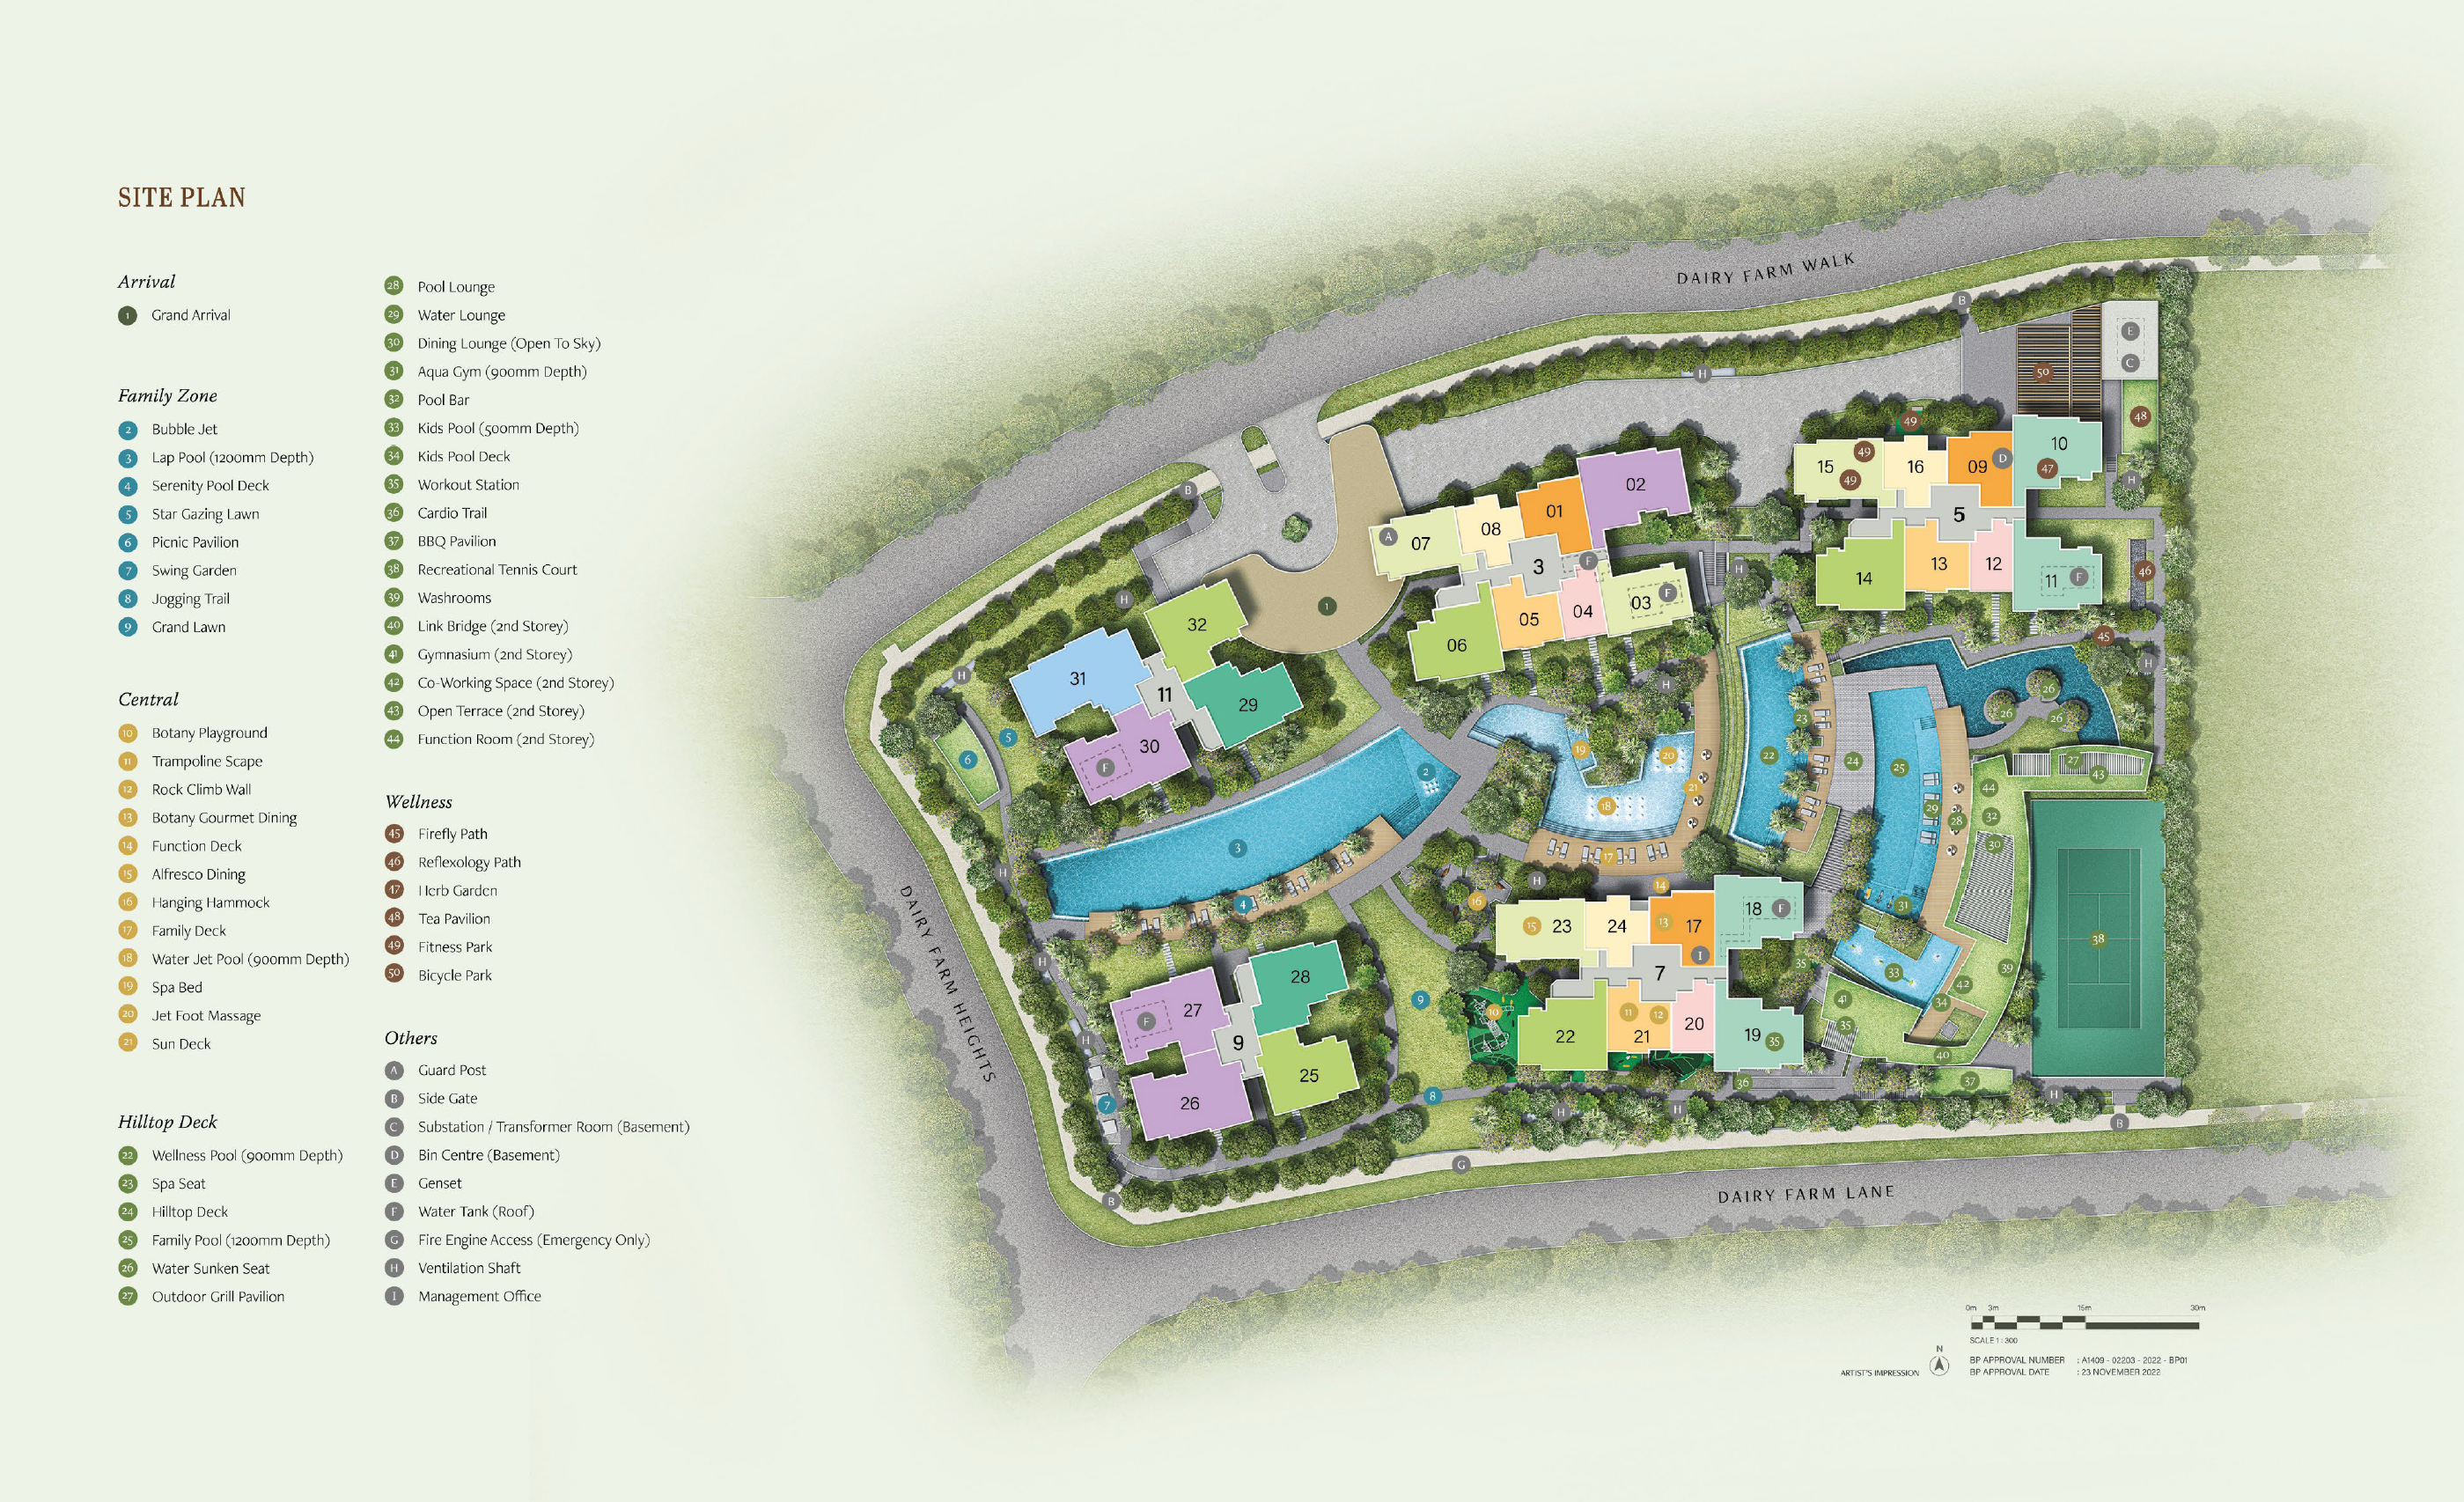 The Botany at Dairy Farm site plan